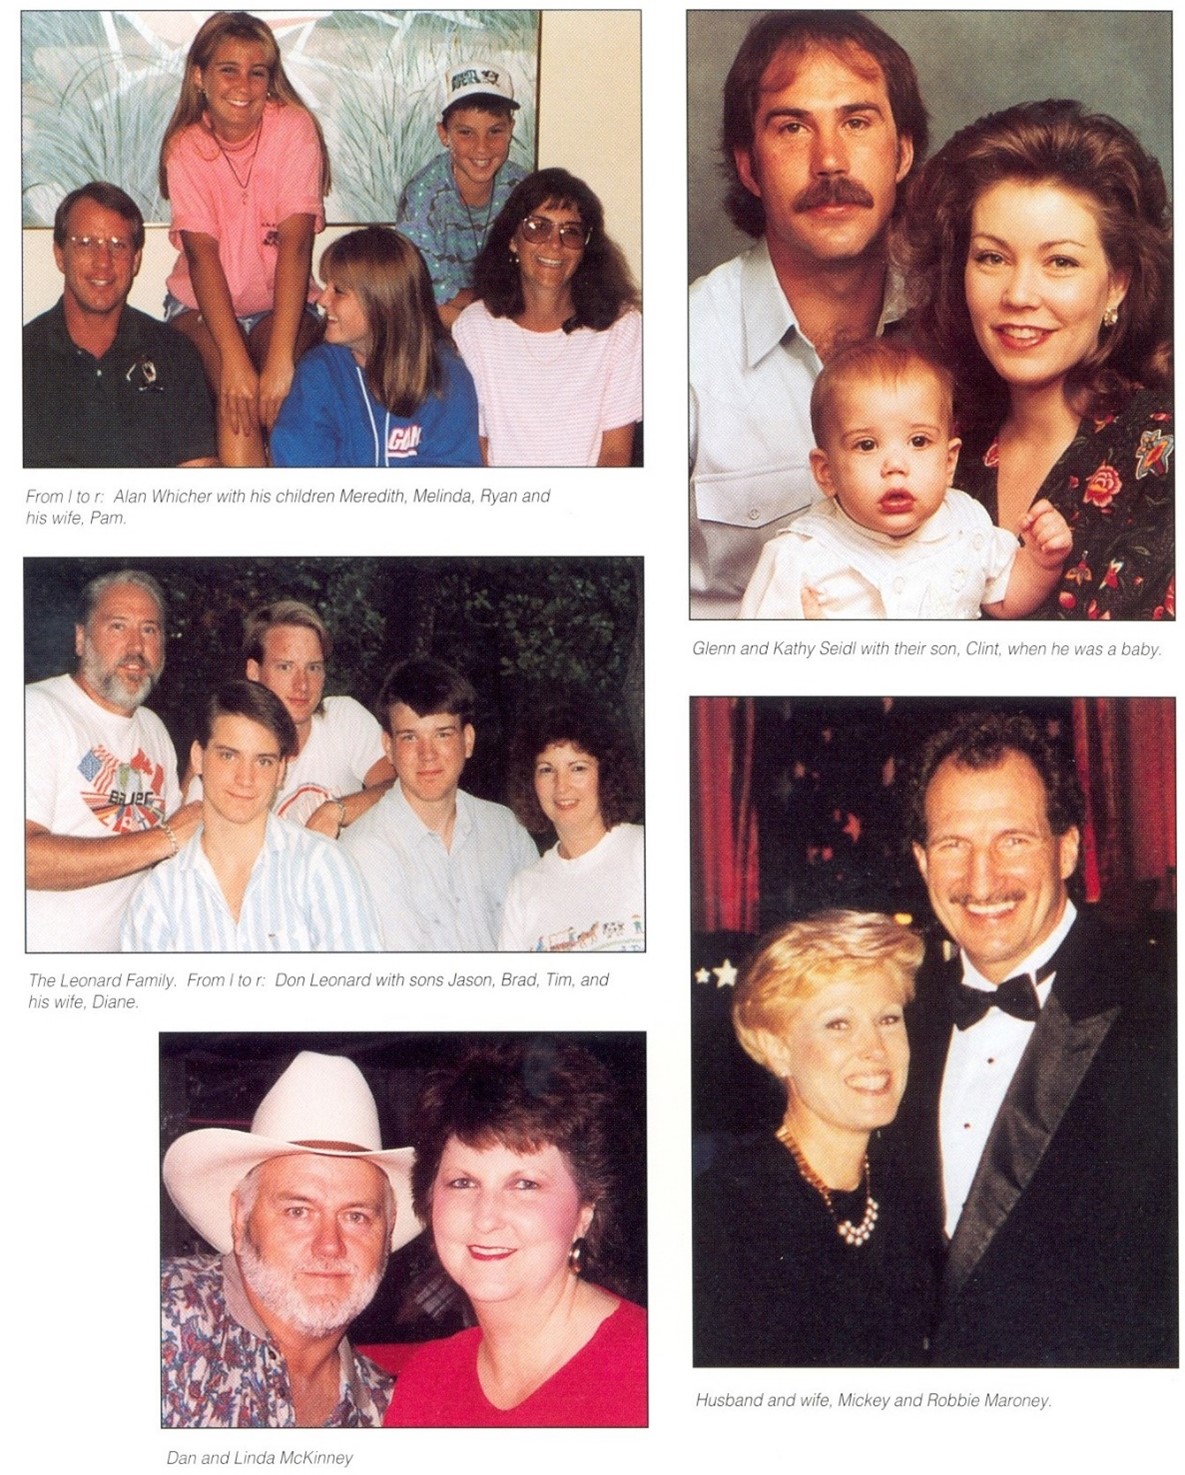 A collage of photos of Secret Service personnel killed in the April 19, 1995, Oklahoma City bombing and their families.